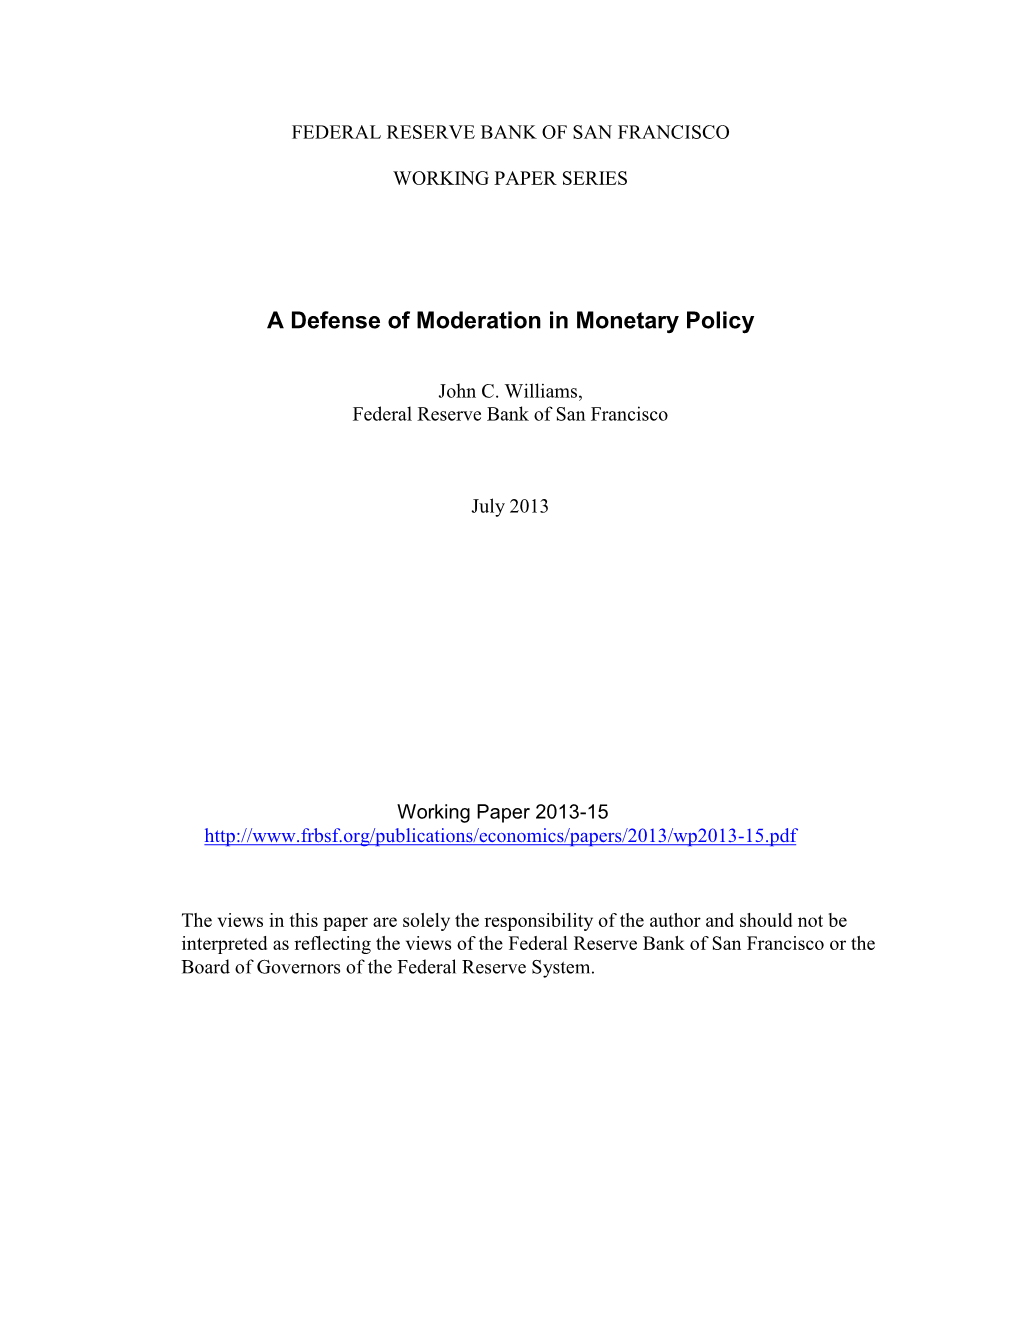 A Defense of Moderation in Monetary Policy